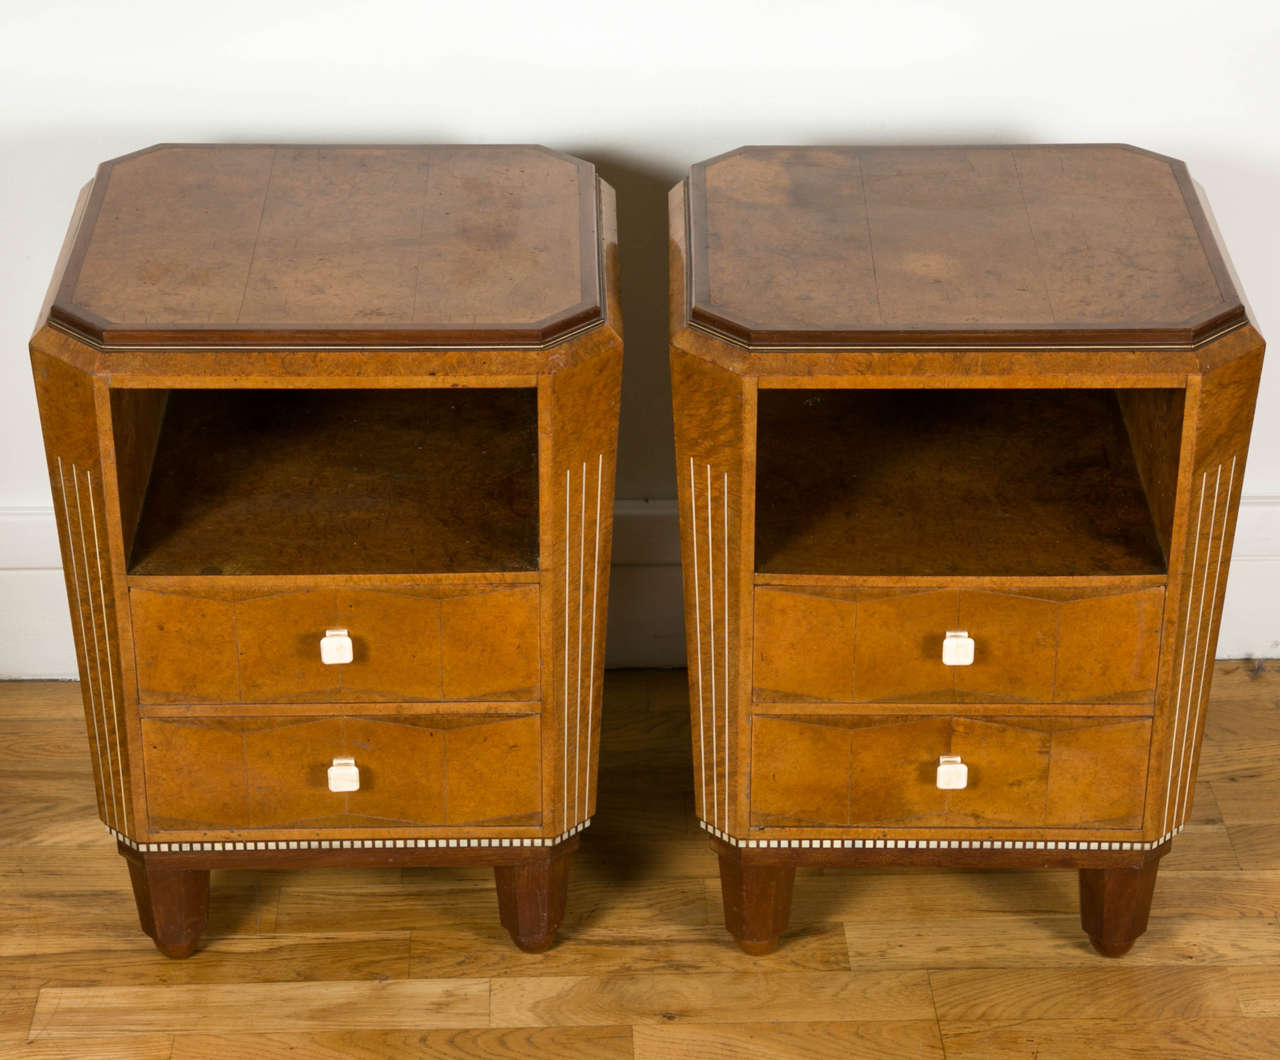 Rare and precious pair of nightstands by Paul Follot (1877-1942), trapezoidal prism shape with two opening top drawers summoned by a niche, in veneer and marquetry. Marquetry on all faces, carved mahogany feet.

This piece of furniture is